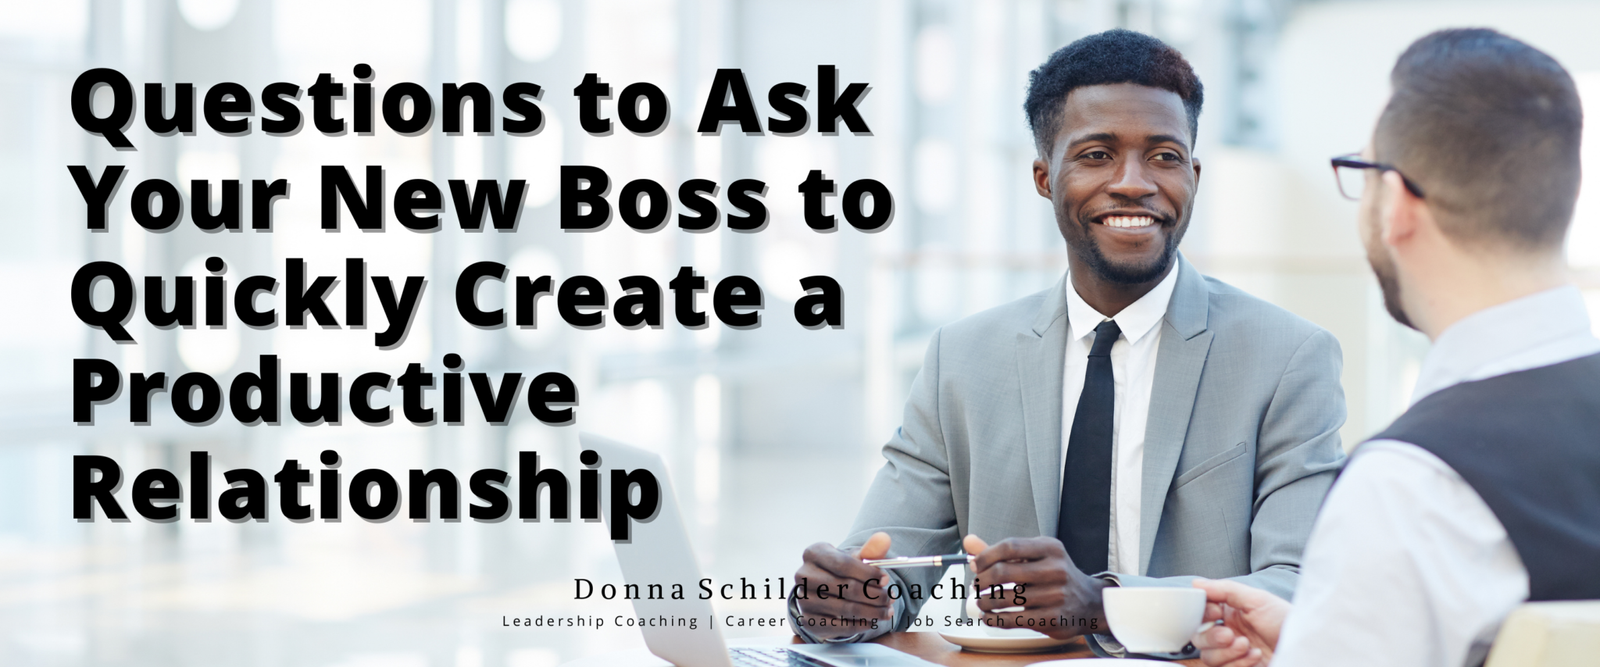 Questions To Ask Your New Boss To Create Success In Your New Job